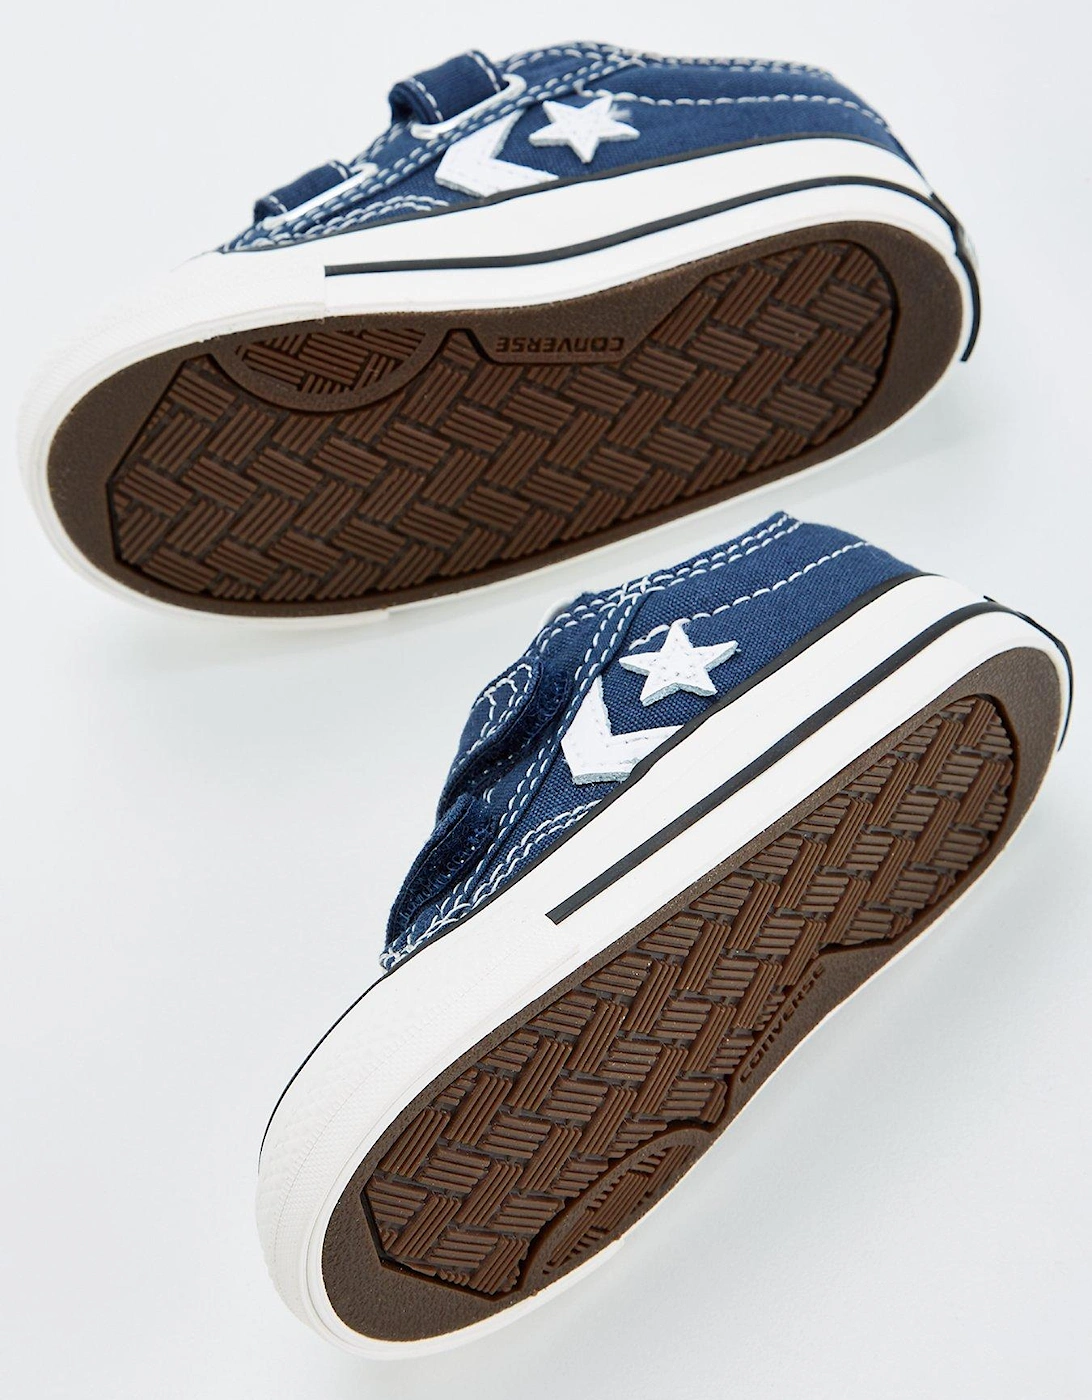 Infant Star Player 76 Ox Trainers - Navy/white